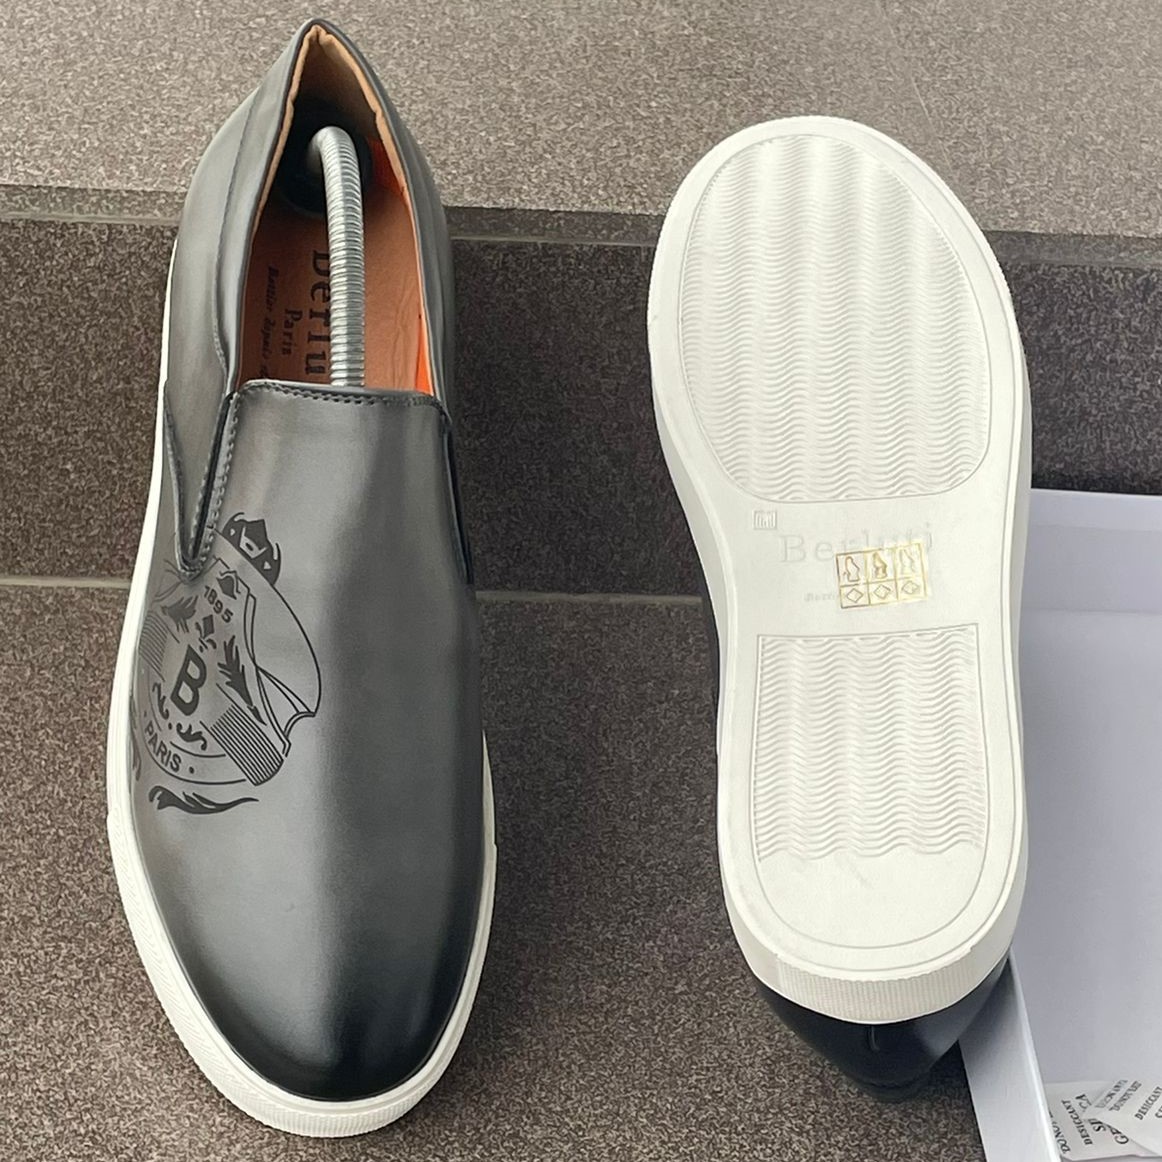 QUALITY DESIGNERS ITALIAN LEATHER LOAFERS for CartRollers Marketplace For Shopping Online, Fashion, Electronics, Phones, Computers and Buy Men Shoe, Home Appliances, Kitchen-wares, Groceries Accessories,ankara, Aso Ebi, Beads, Boys Casual Wears, Children Children's Wears ,Corporate Shoes, Cosmetics Dress ,Dresses Fashion, Girls' Dresses ,Girls' Wears, Hair Care ,Jewelries ,Jewelry Kids, Kids' Fashion Ladies ,Wears Lapel Pins, Loafers Shoe Men ,Men's Caftan, Men's Casual Soes, Men's Fashion, Men's Shoes, Men's Wears, Moccasin Shoe, Natural Hair, In Lagos Nigeria